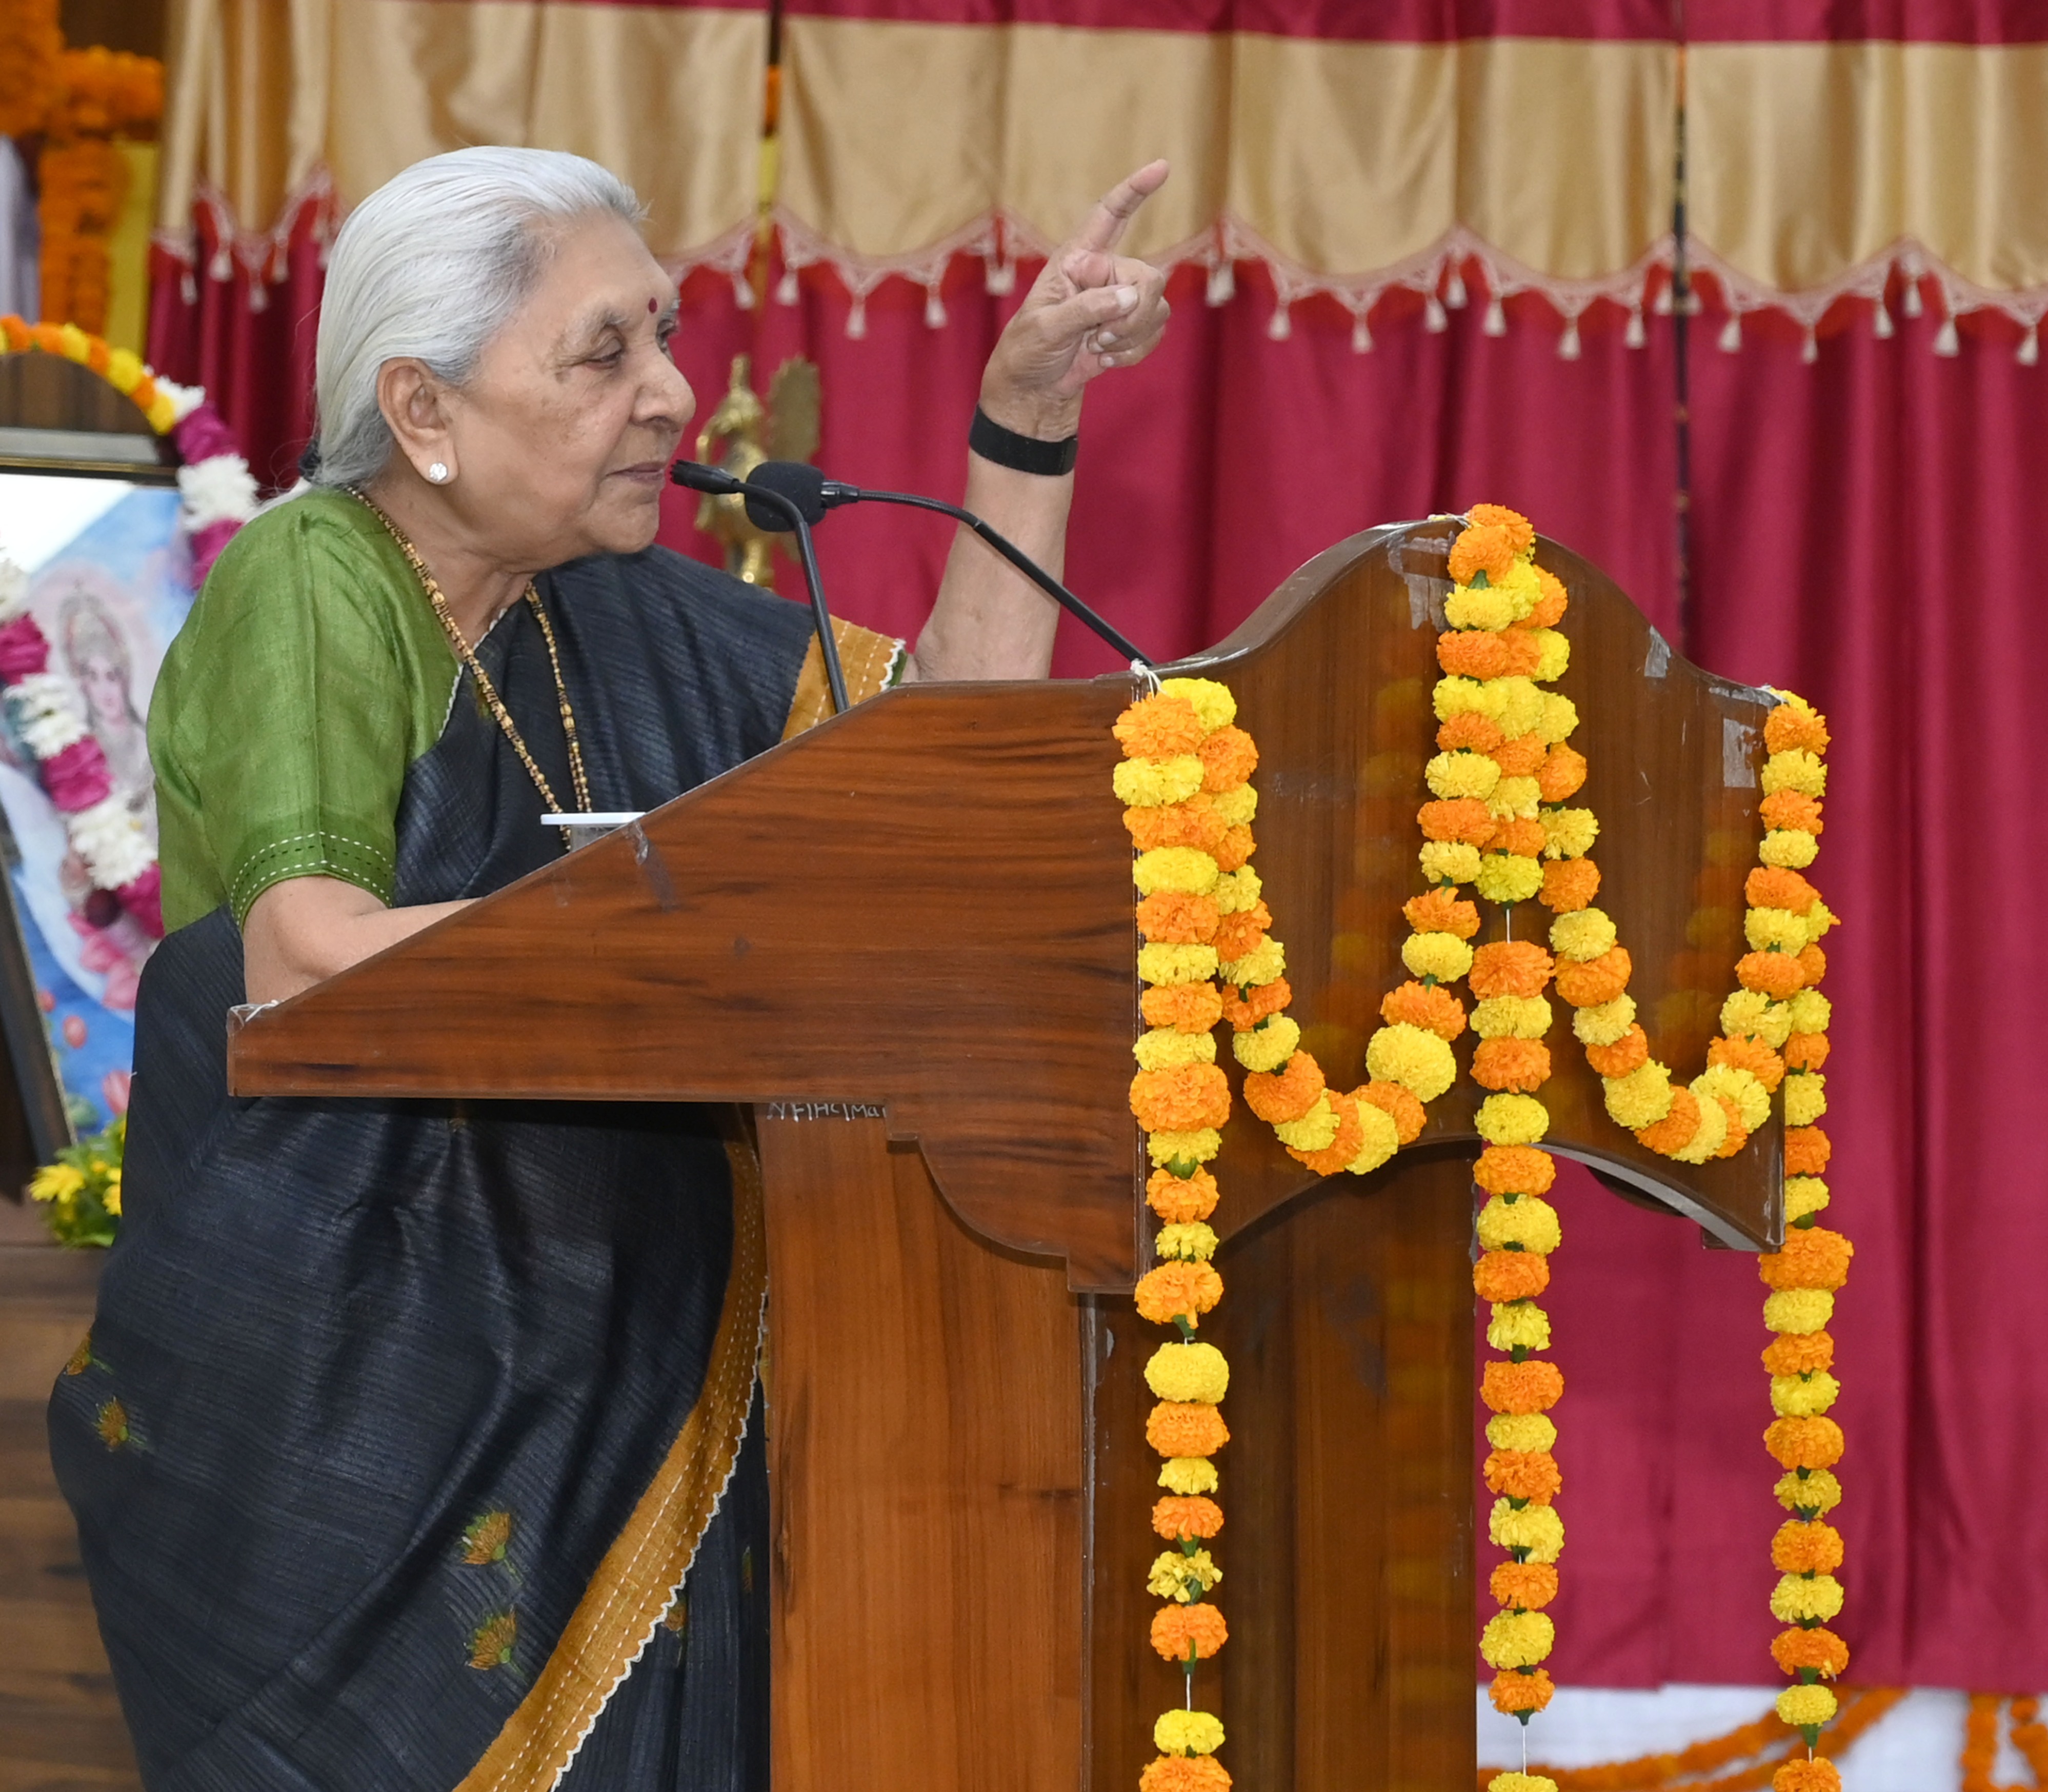 The Governor participated in the seminar Role of Women in the Field of Law organized at Lucknow High Court